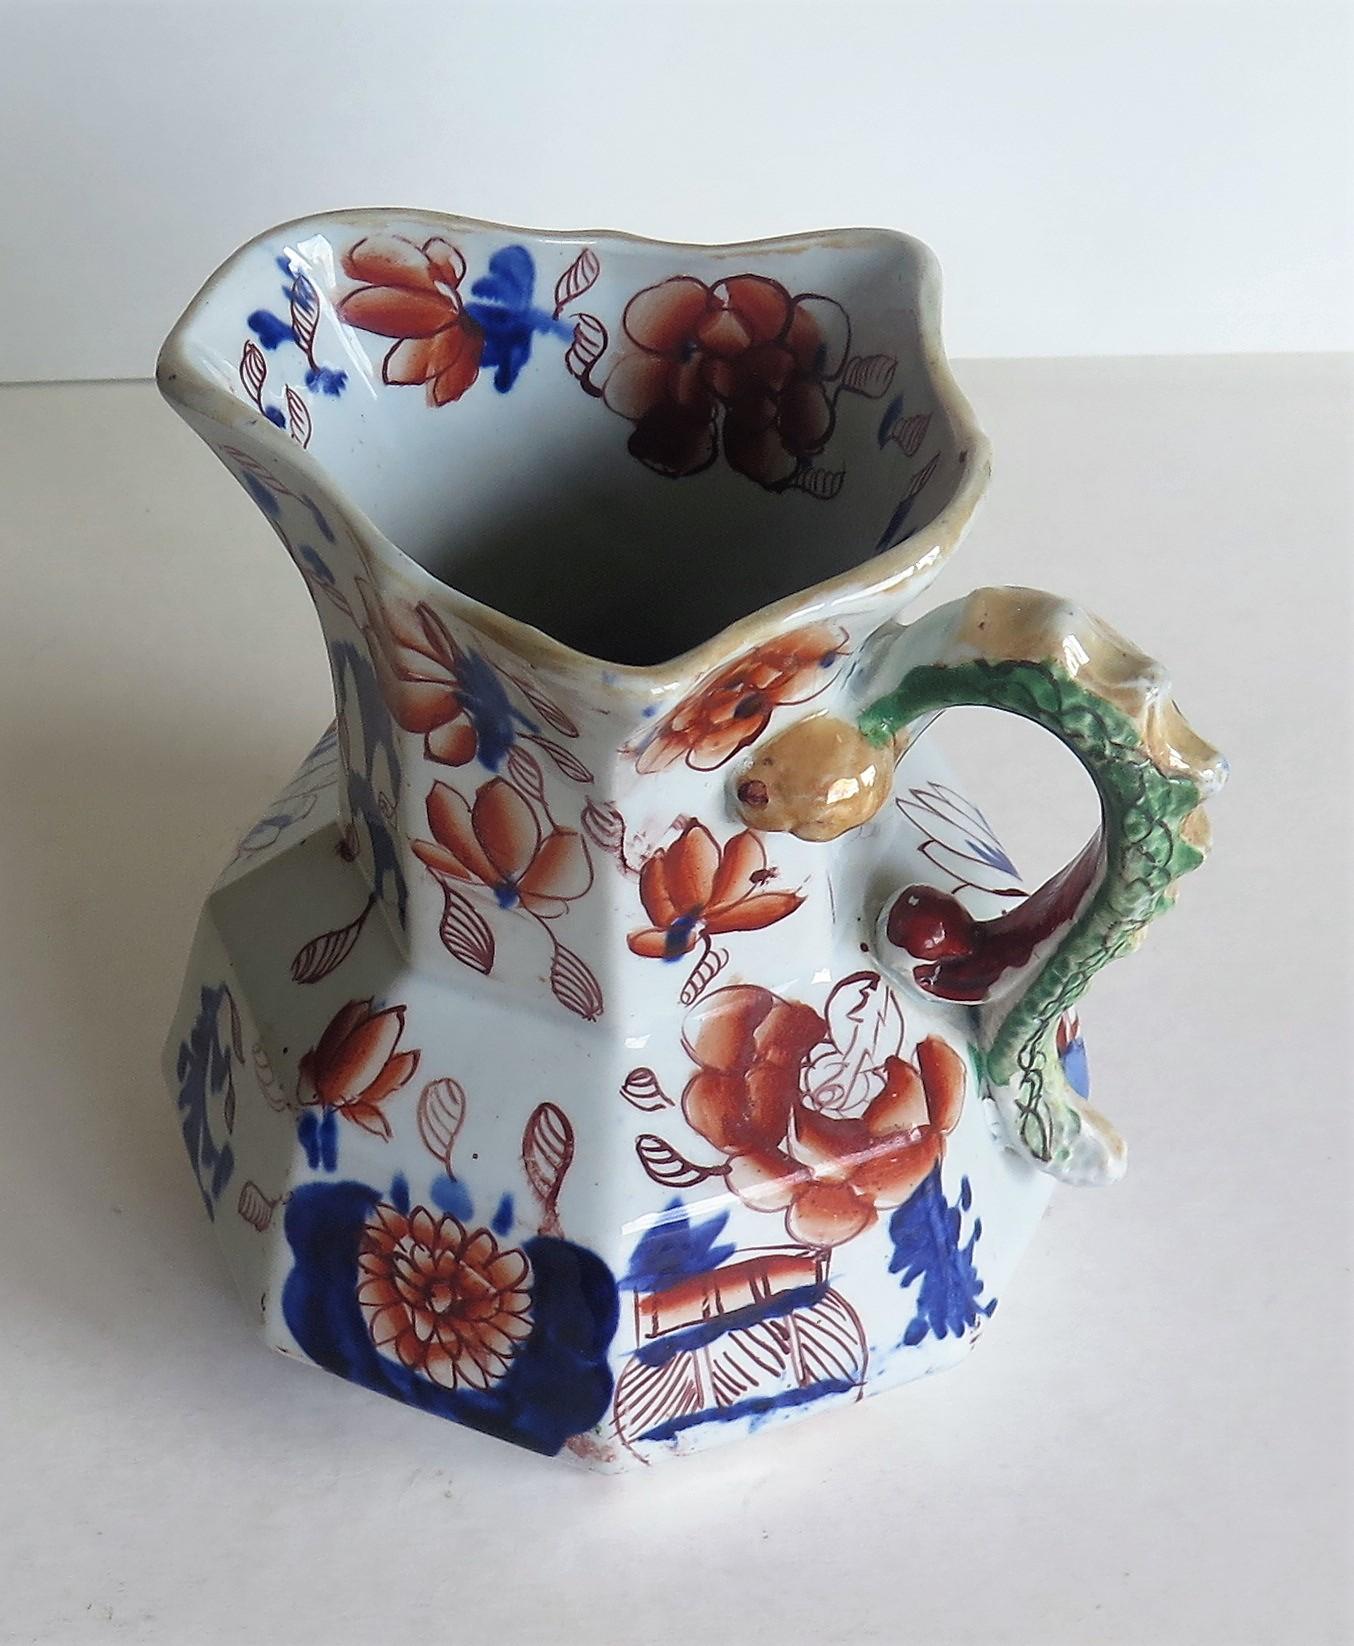 This is a good, very early Mason's Ironstone Hydra jug in the Japan basket pattern, circa 1813-1815, which is the late George 111rd period. 

The jug has an octagonal shape with a notched snake handle and is hand decorated in the distinctive Japan